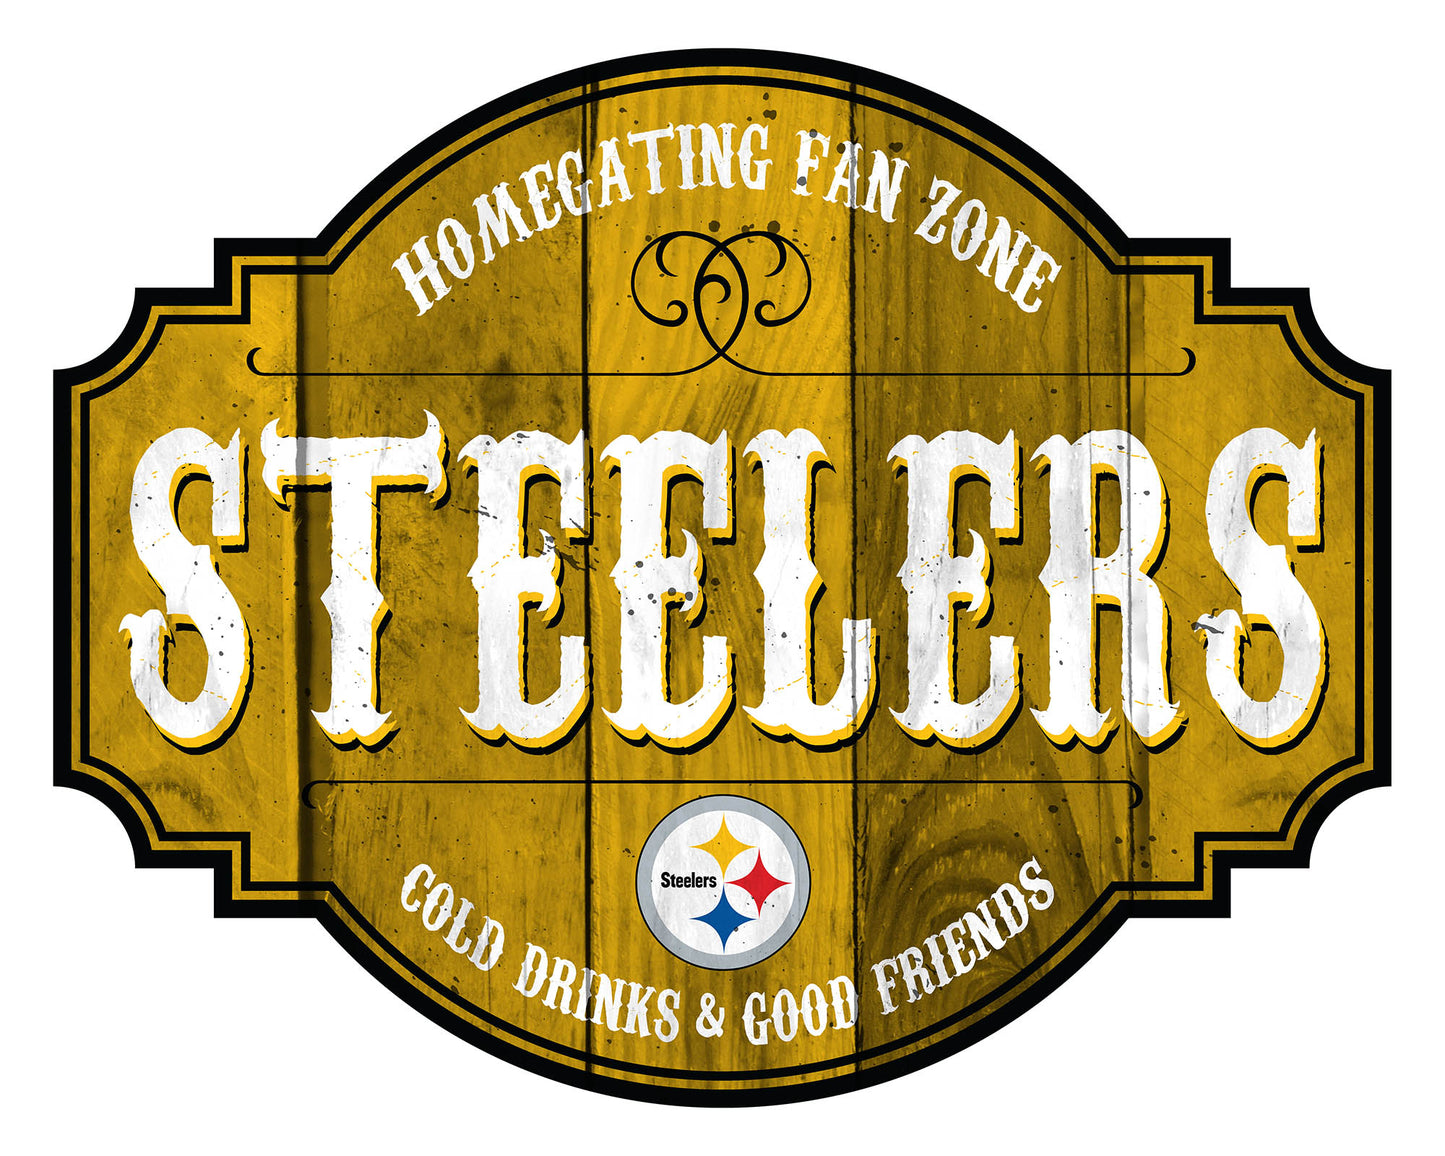 PITTSBURGH STEELERS HOMEGATING TAVERN SIGN